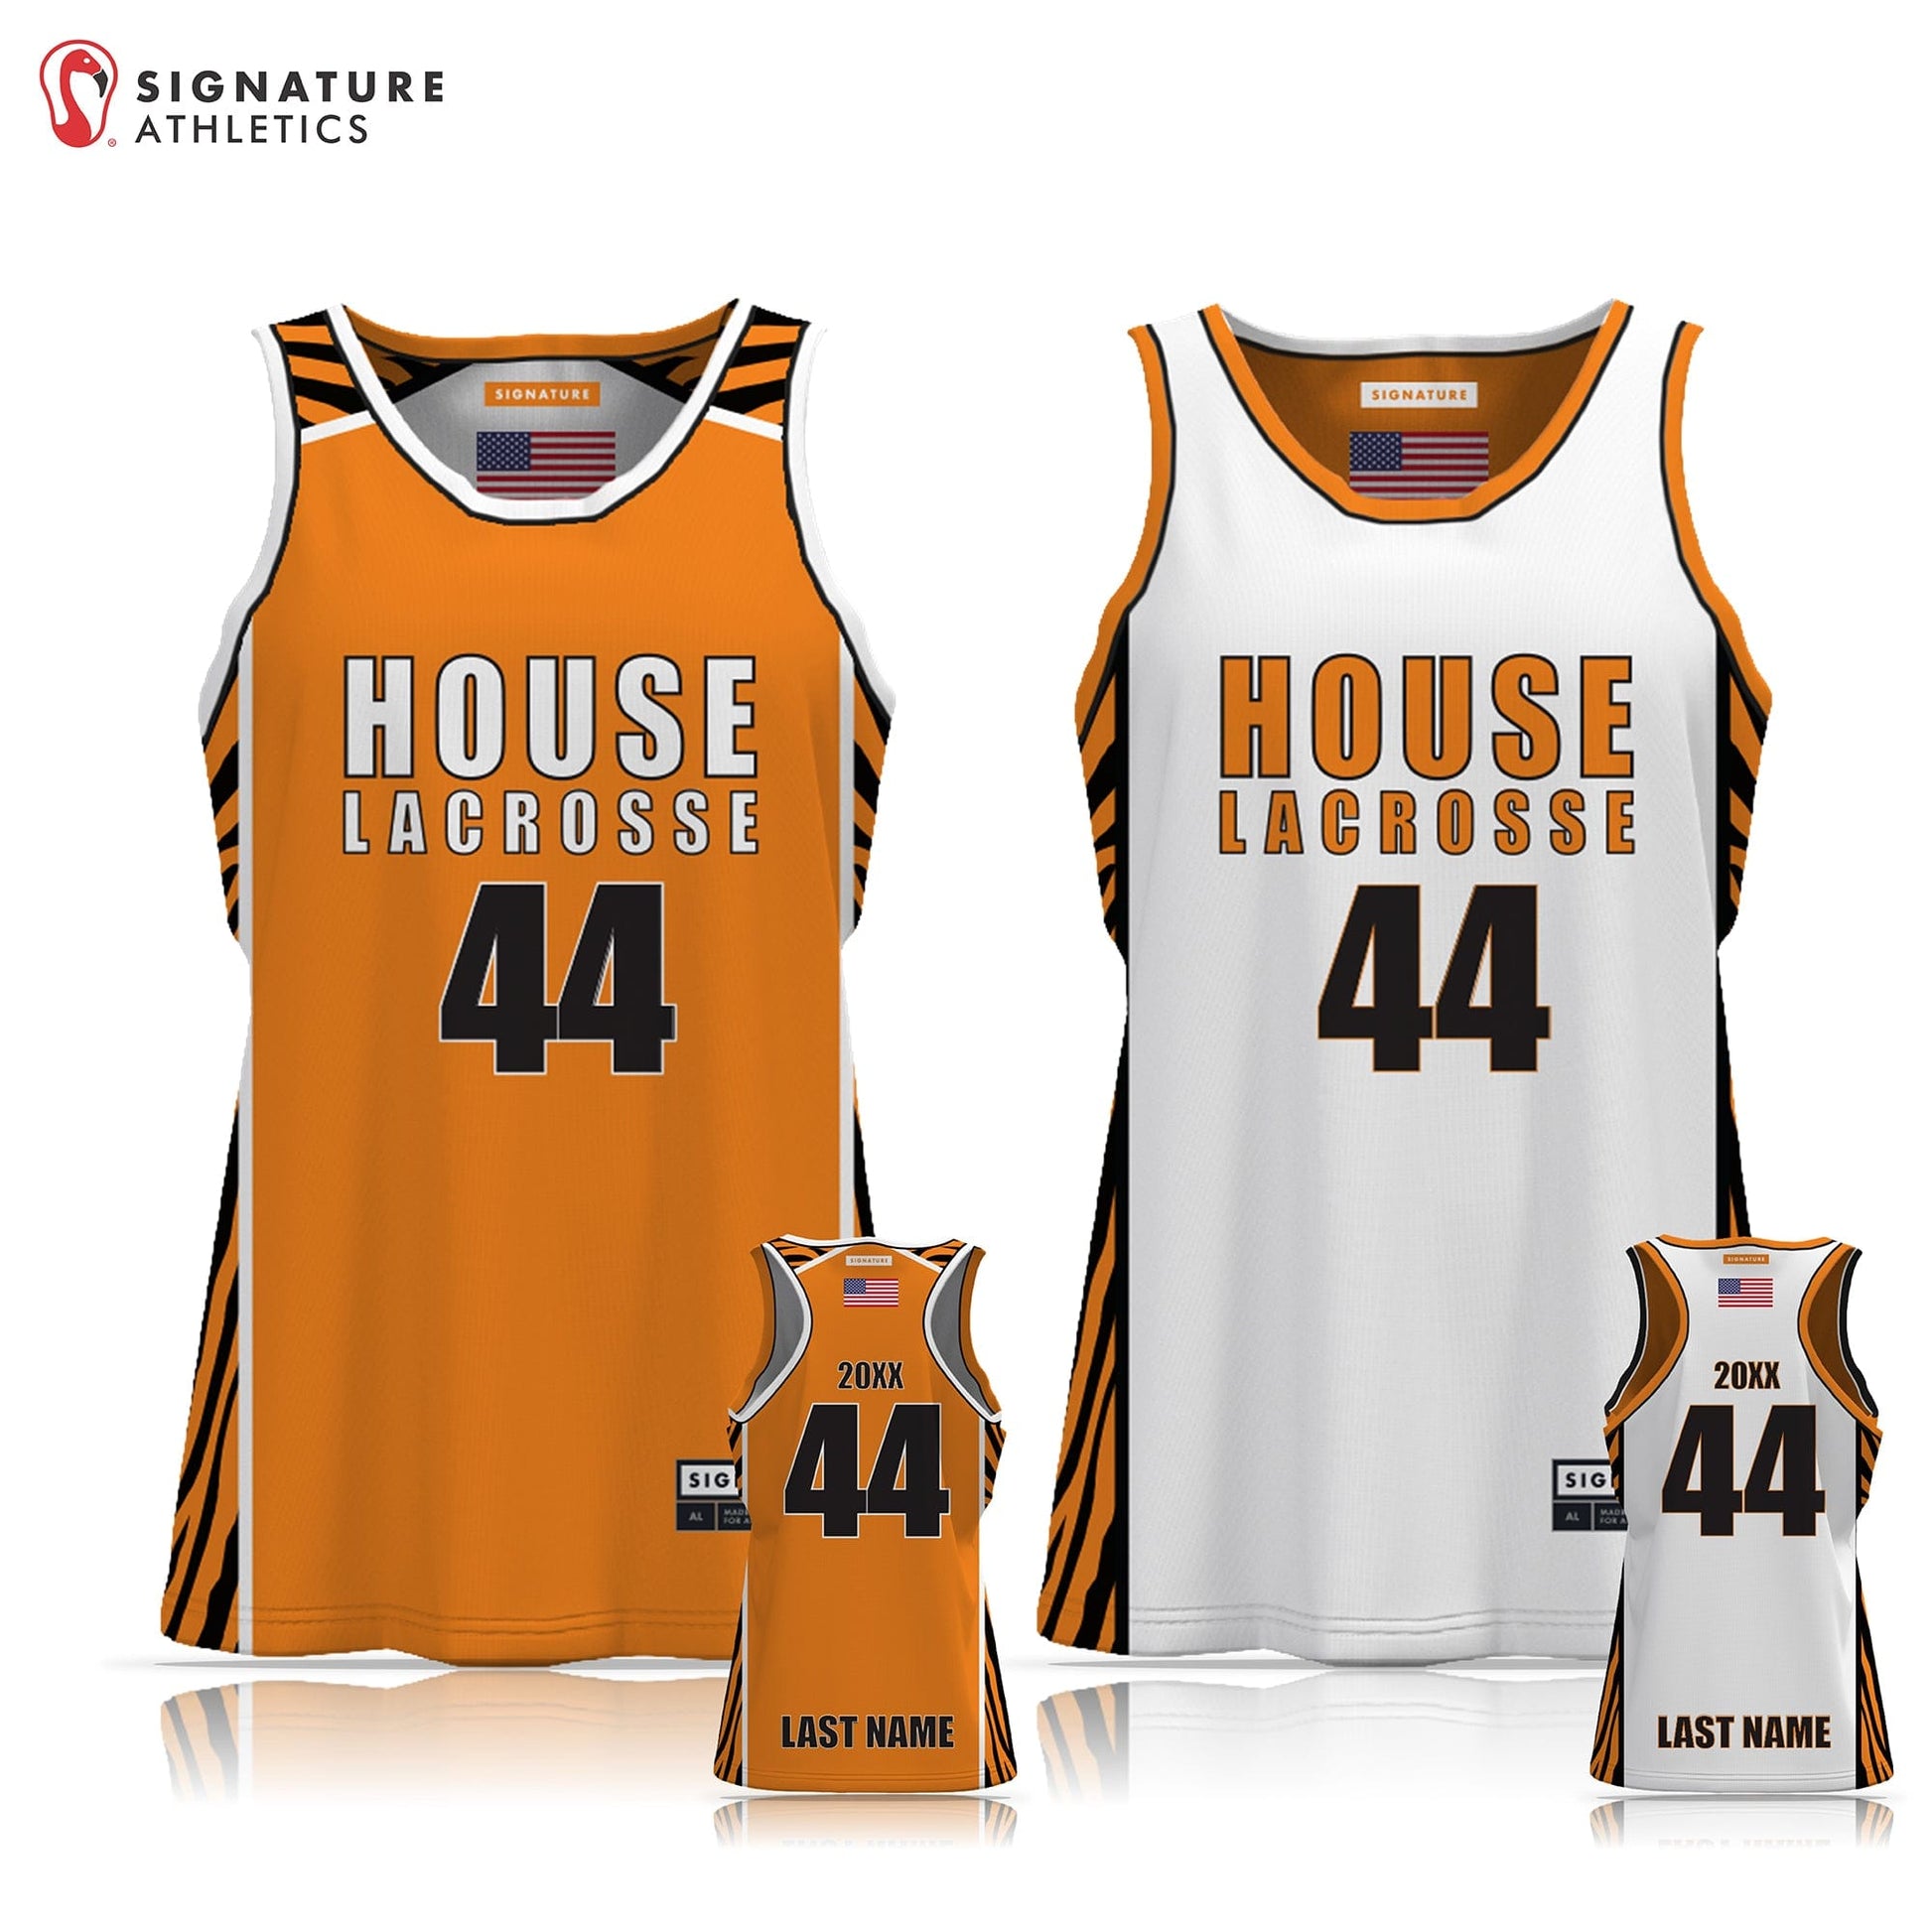 House of Sports Girls Lacrosse Game Reversible:2025 Signature Lacrosse